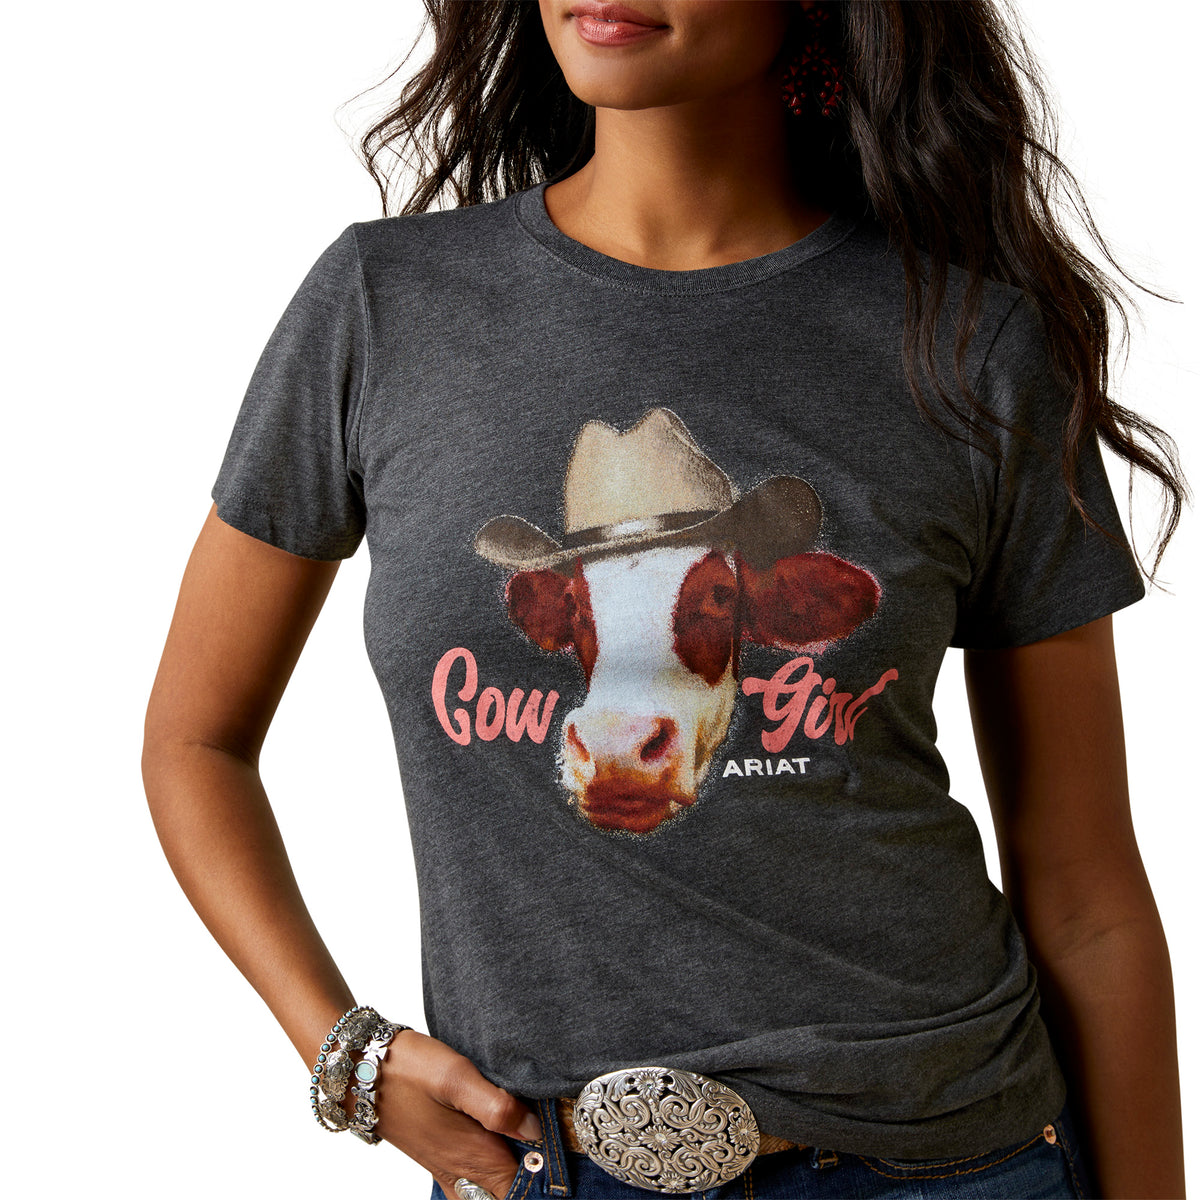 Ariat Womens Cow Girl Tee - Charcoal Heather